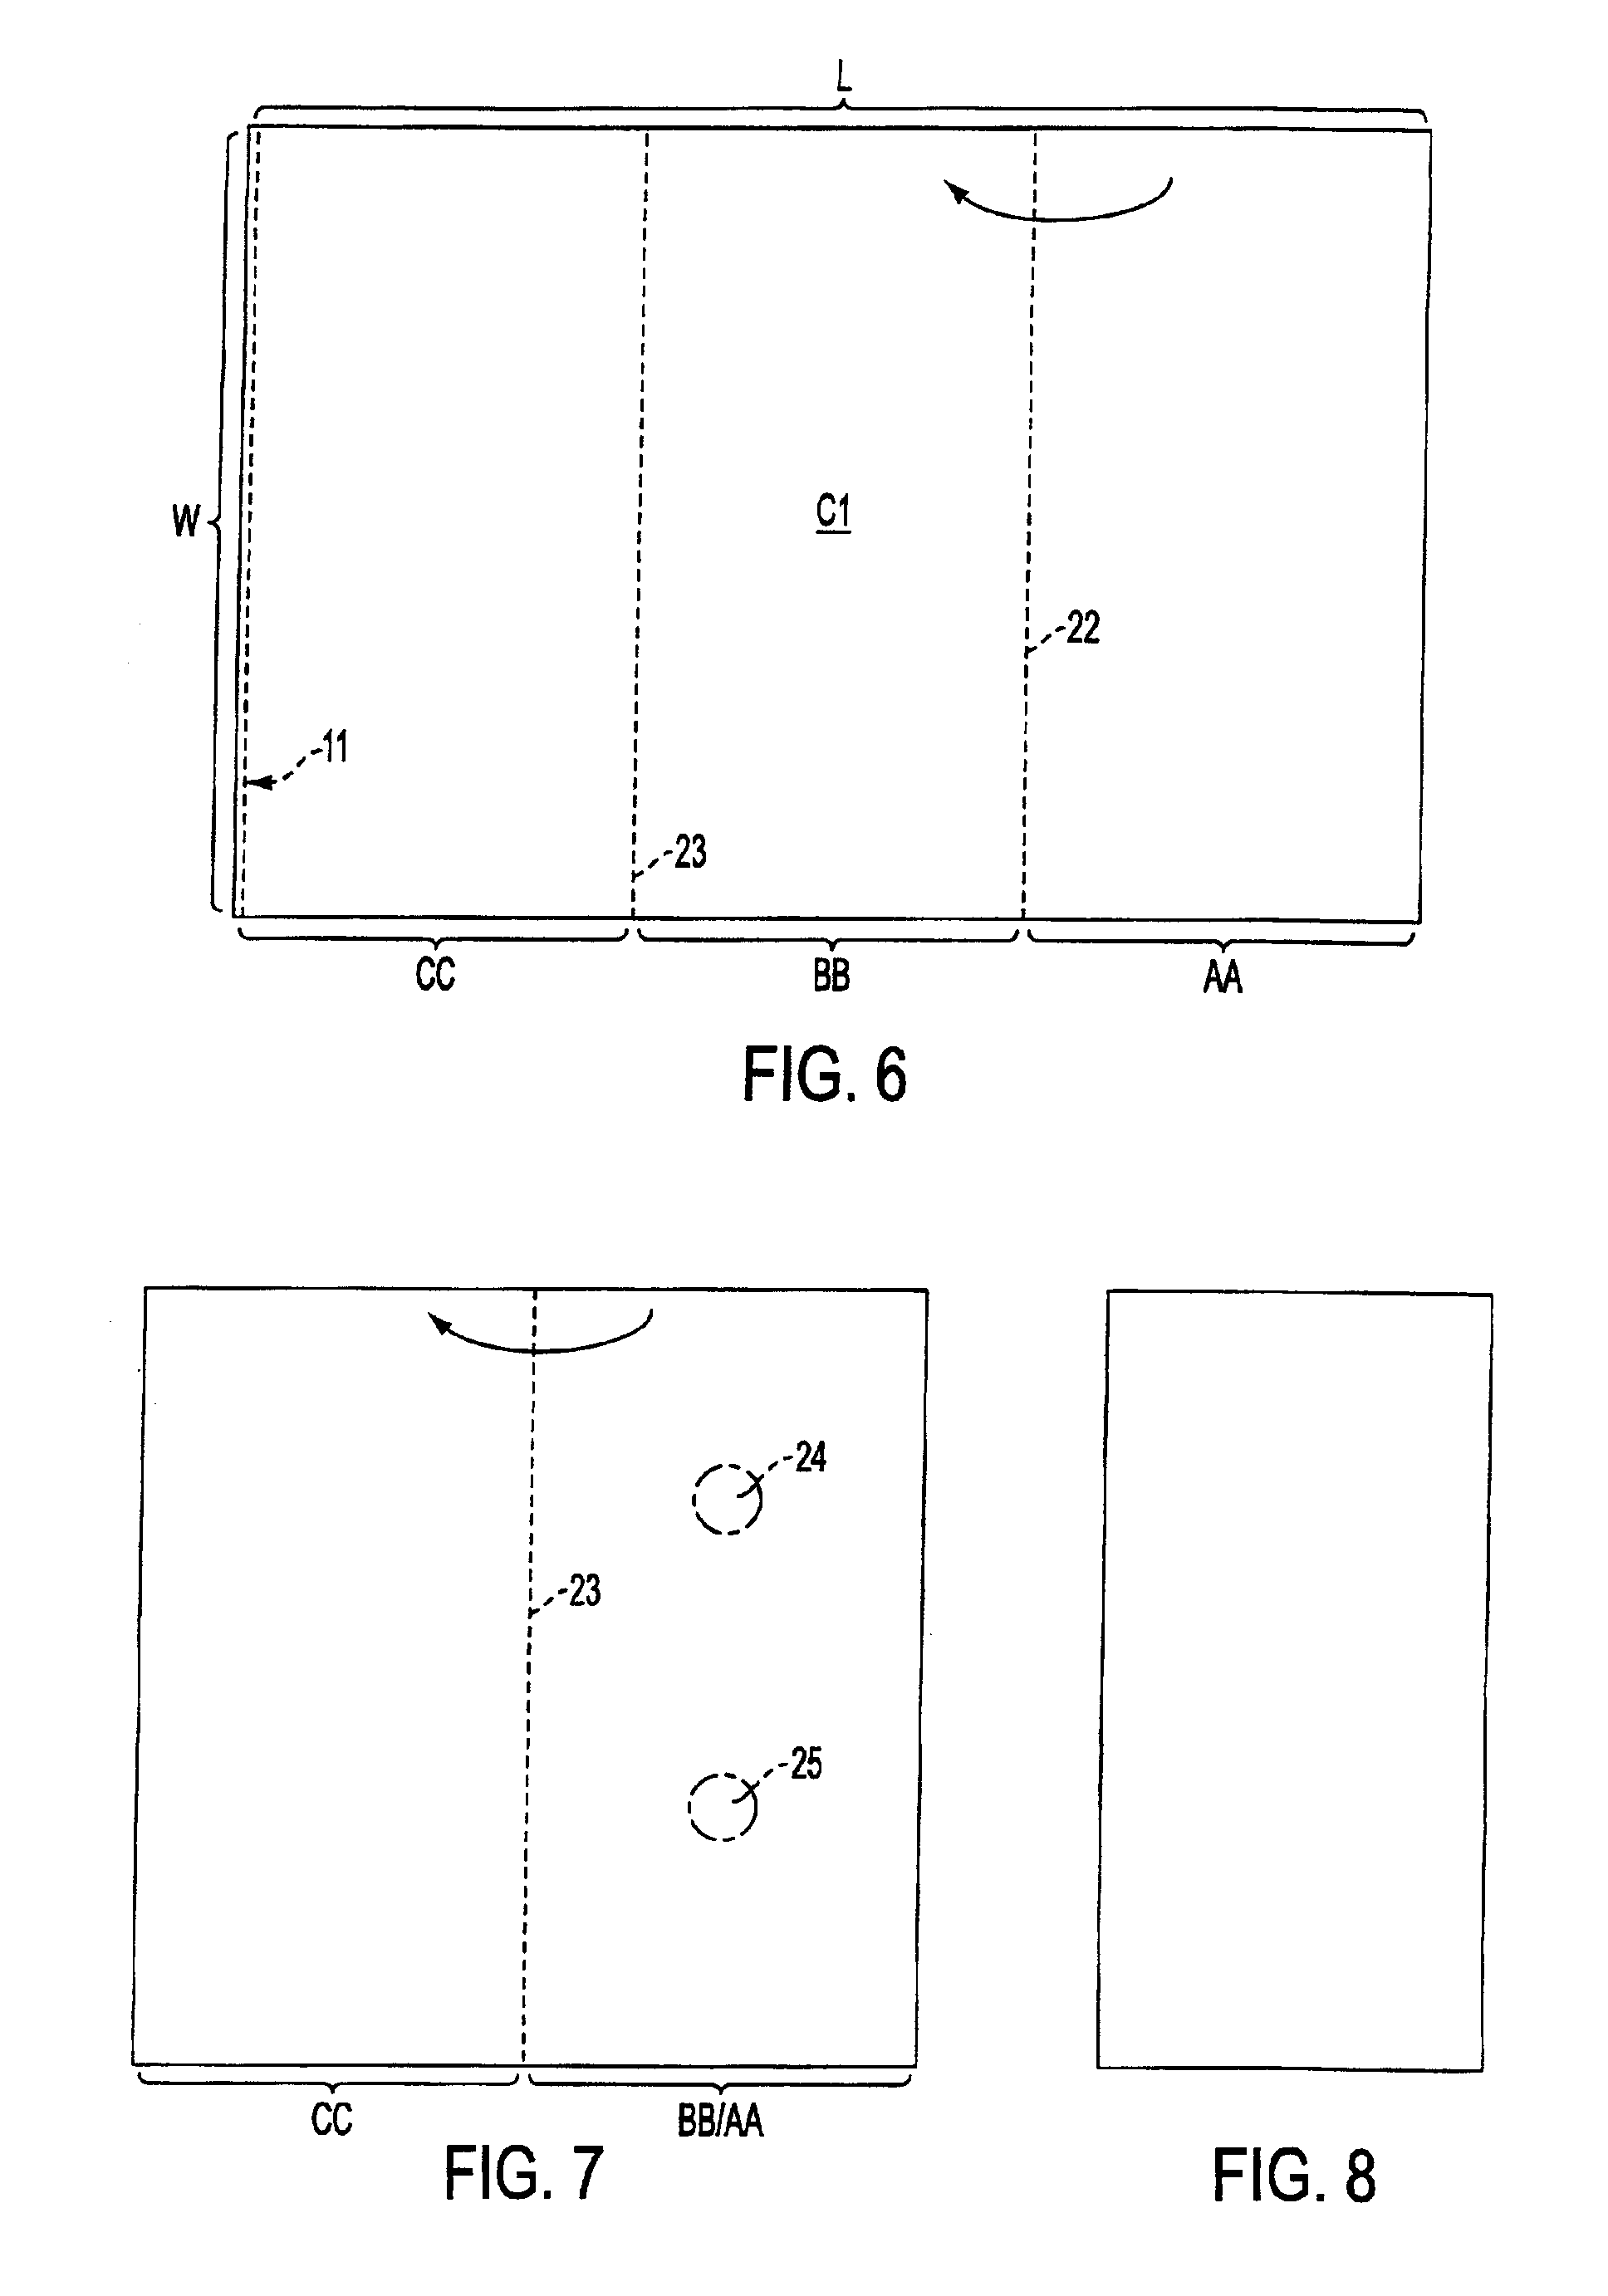 Method of manufacturing a multi-page booklet from a single sheet